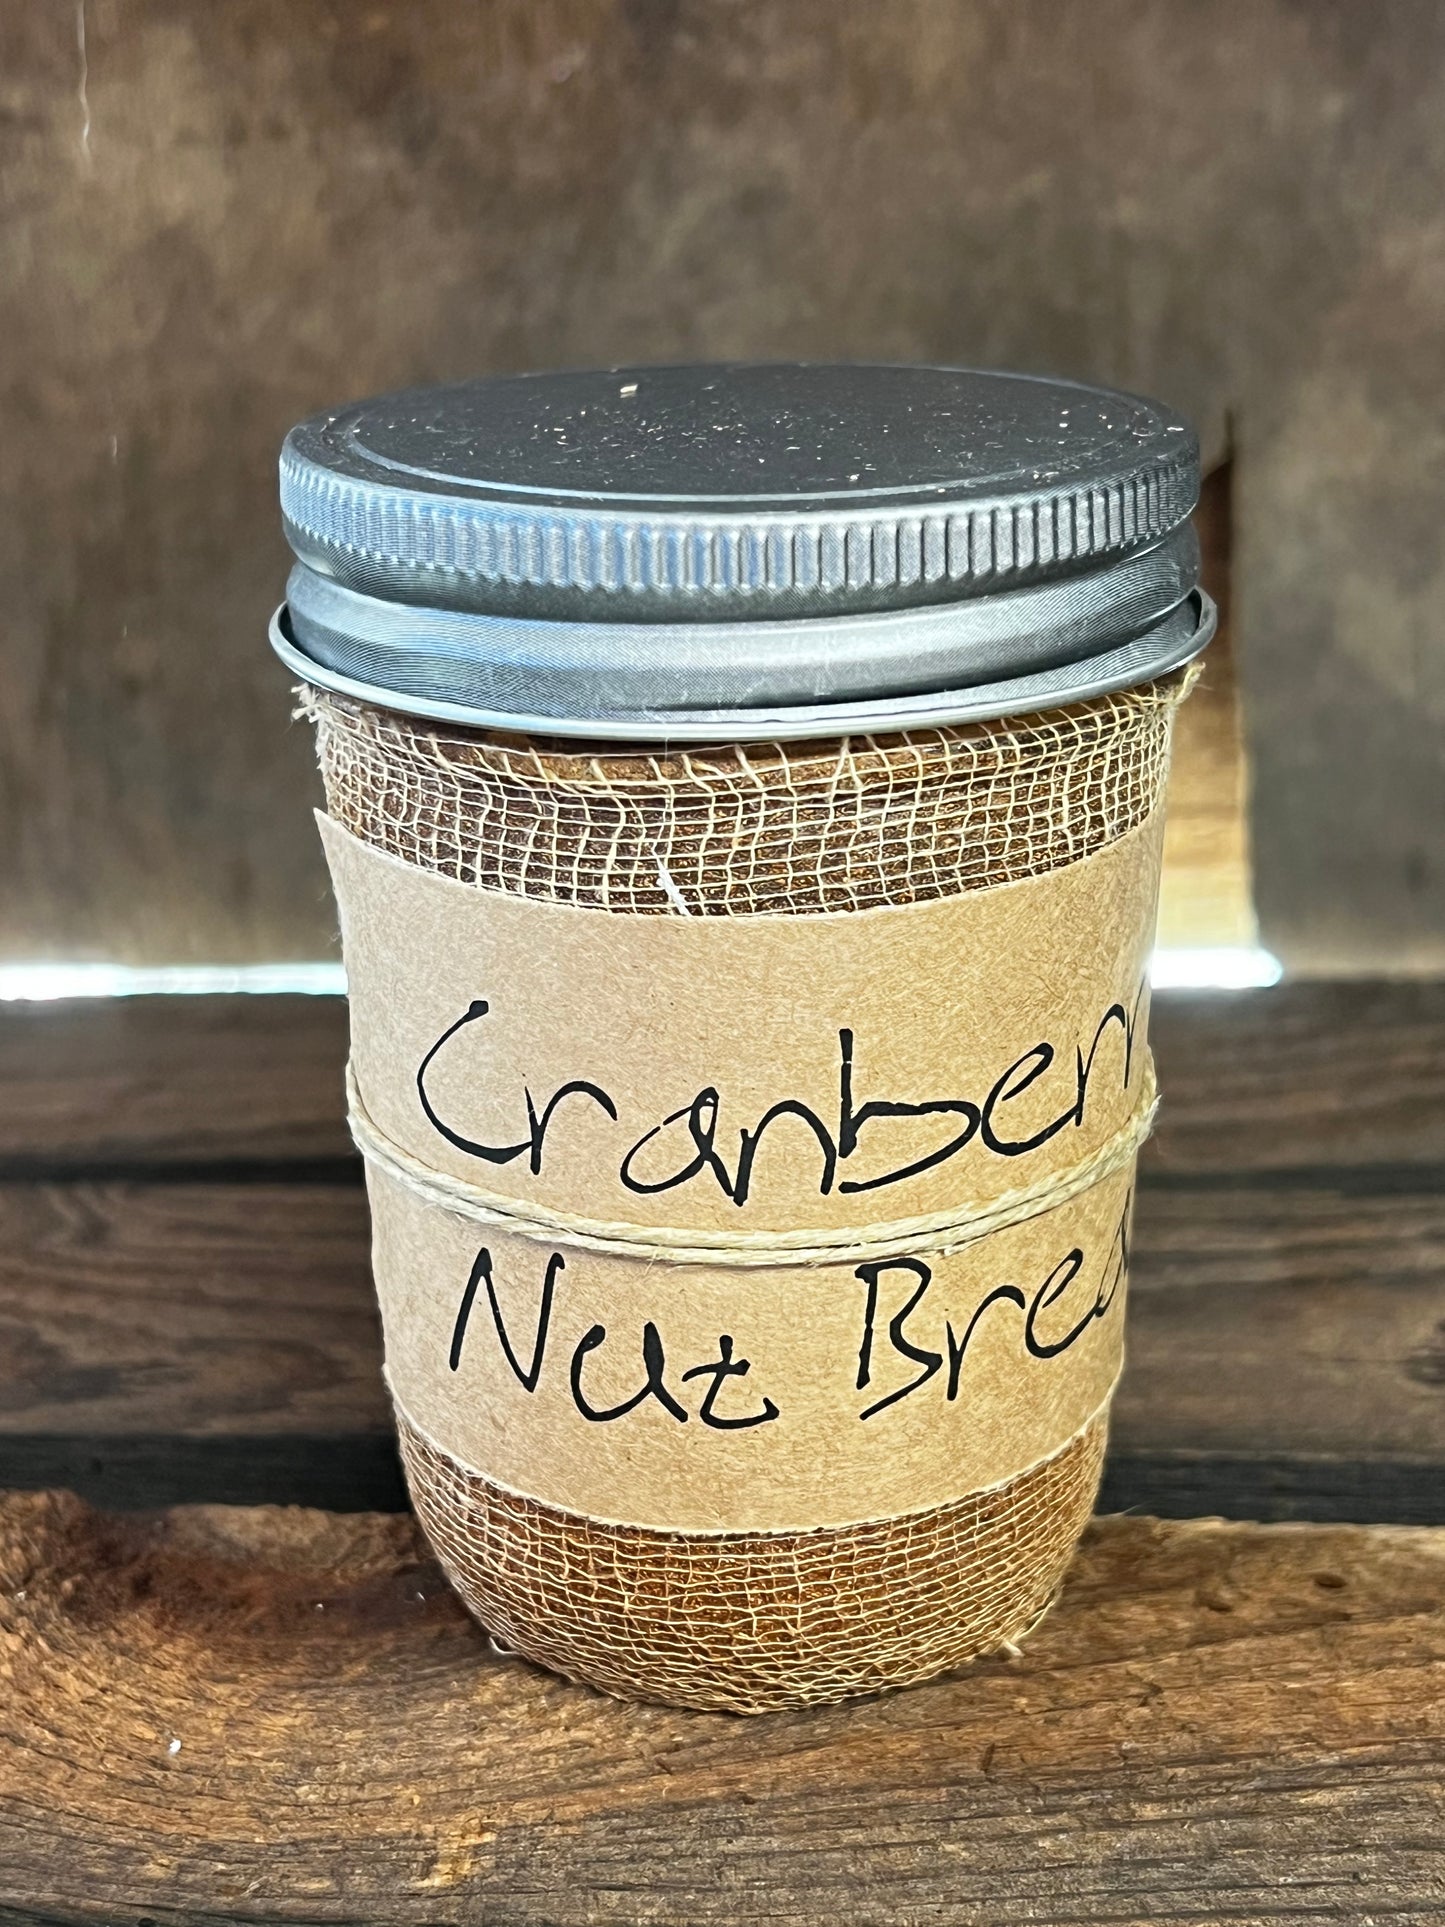 CRANBERRY NUT BREAD, 8 ounce